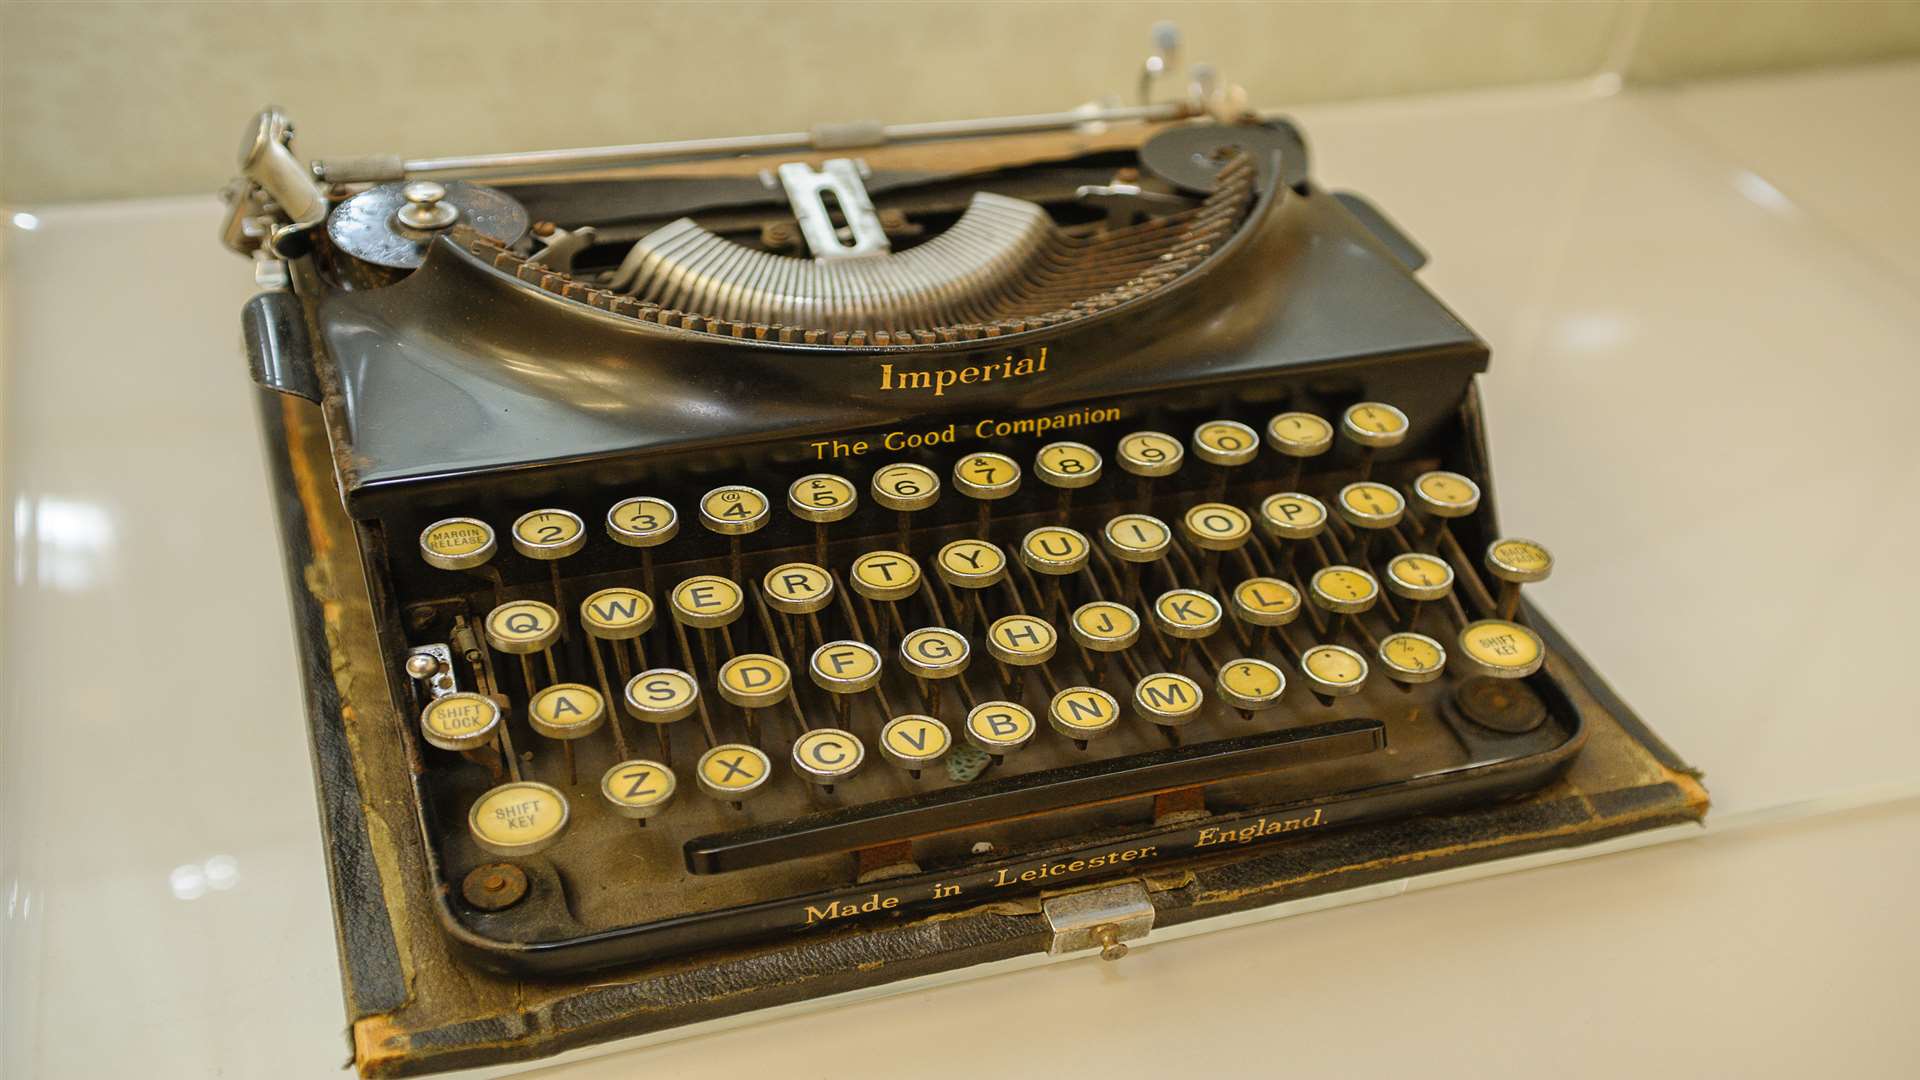 Enid Blyton's typewriter is at the exhibition